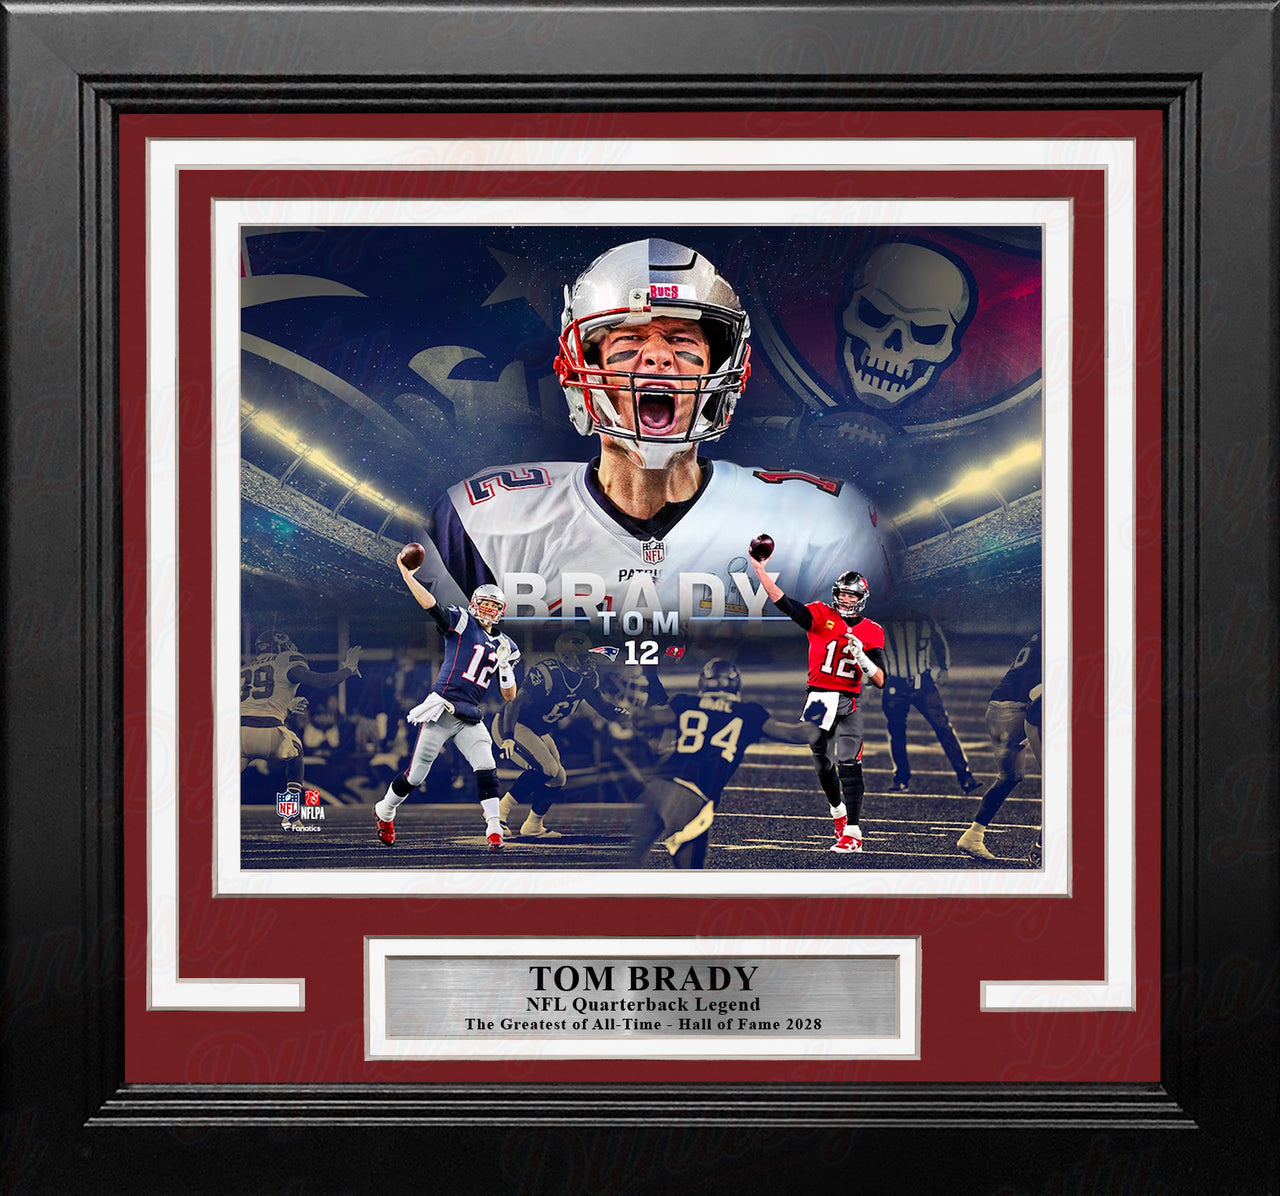 Tom Brady New England Patriots & Tampa Bay Buccaneers 8" x 10" Framed Collage Football Photo - Dynasty Sports & Framing 